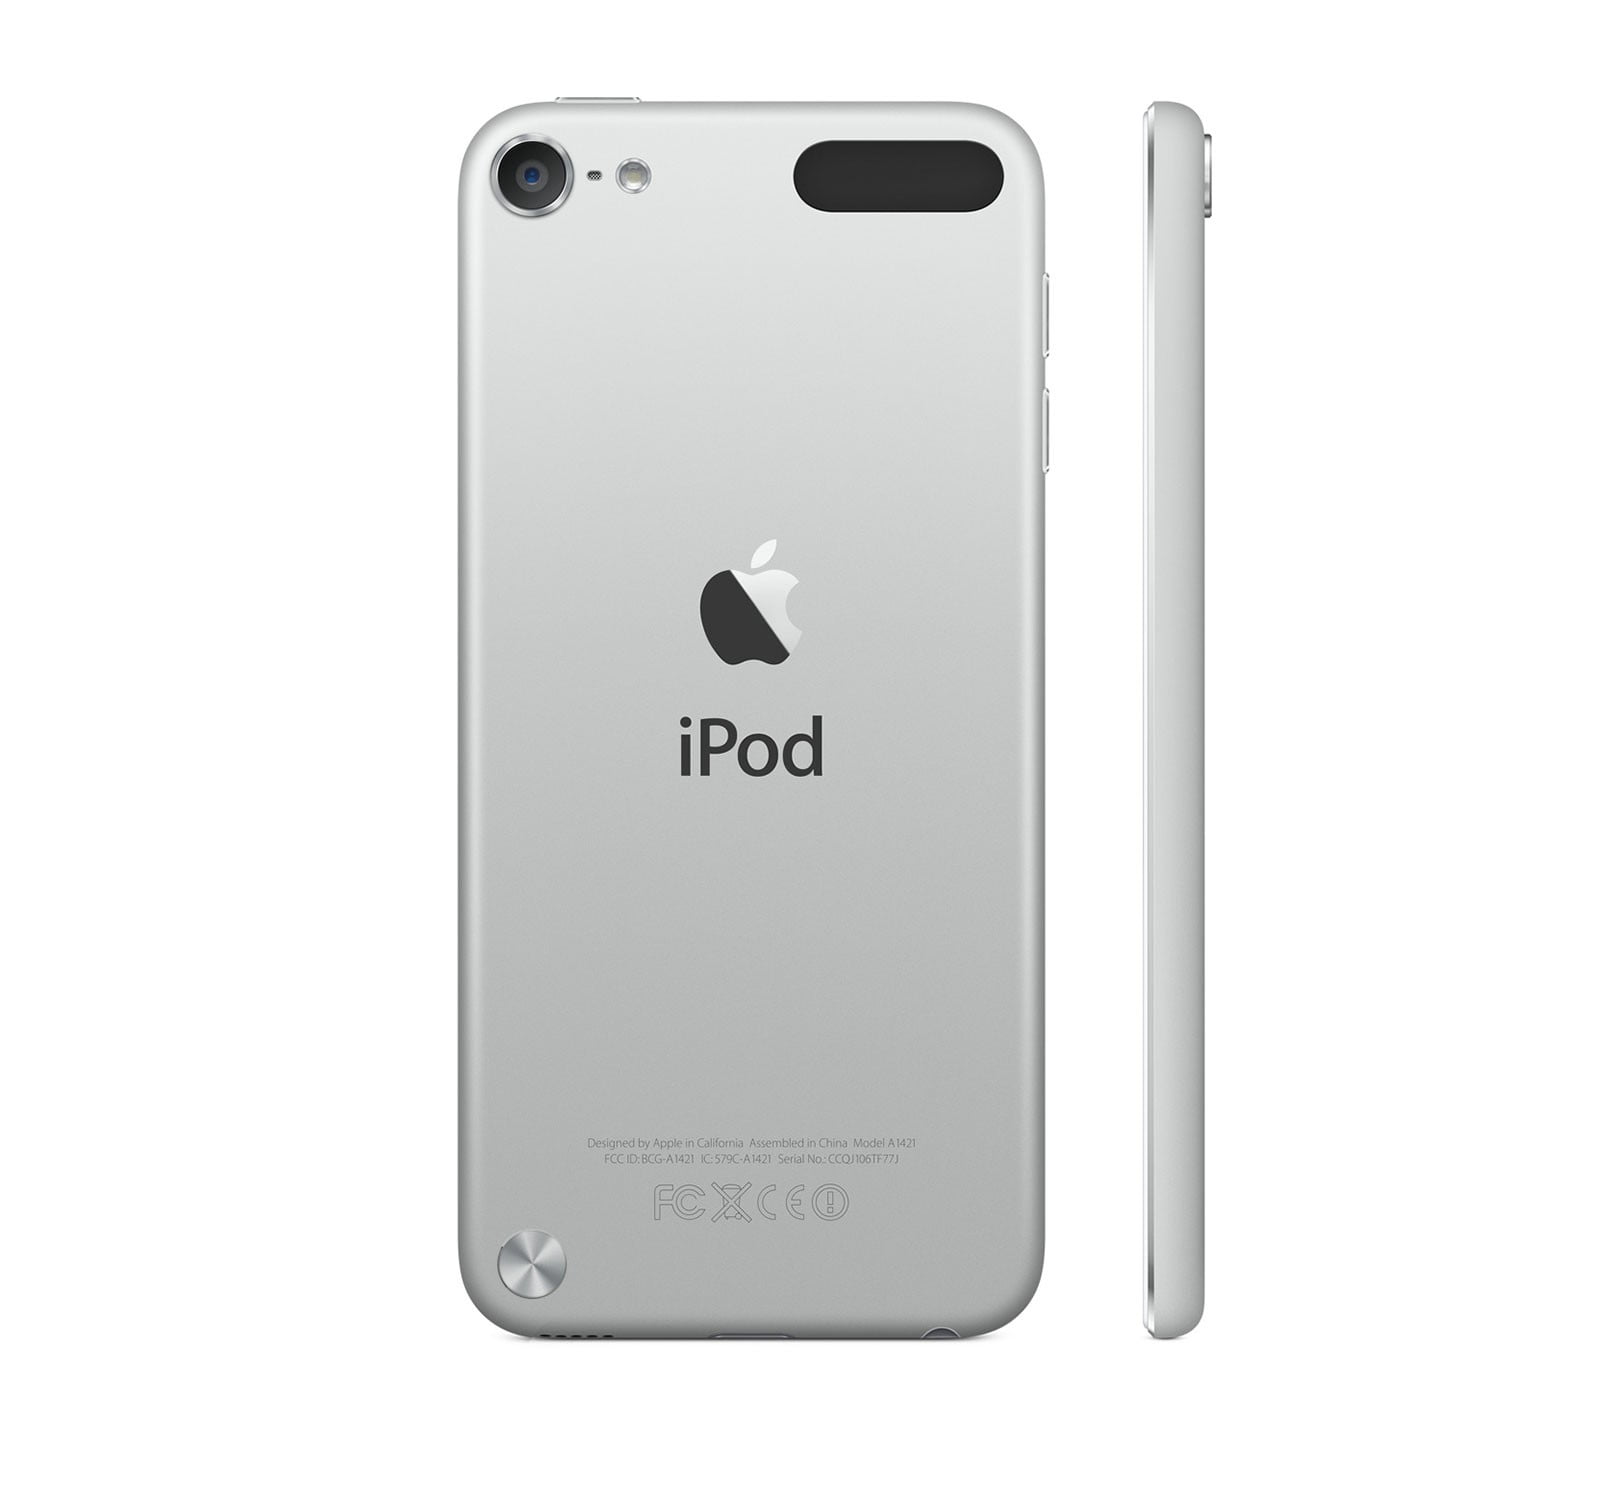 Apple iPod touch 32GB MP3 Player, Silver, VIPRB-MD720LL/A 